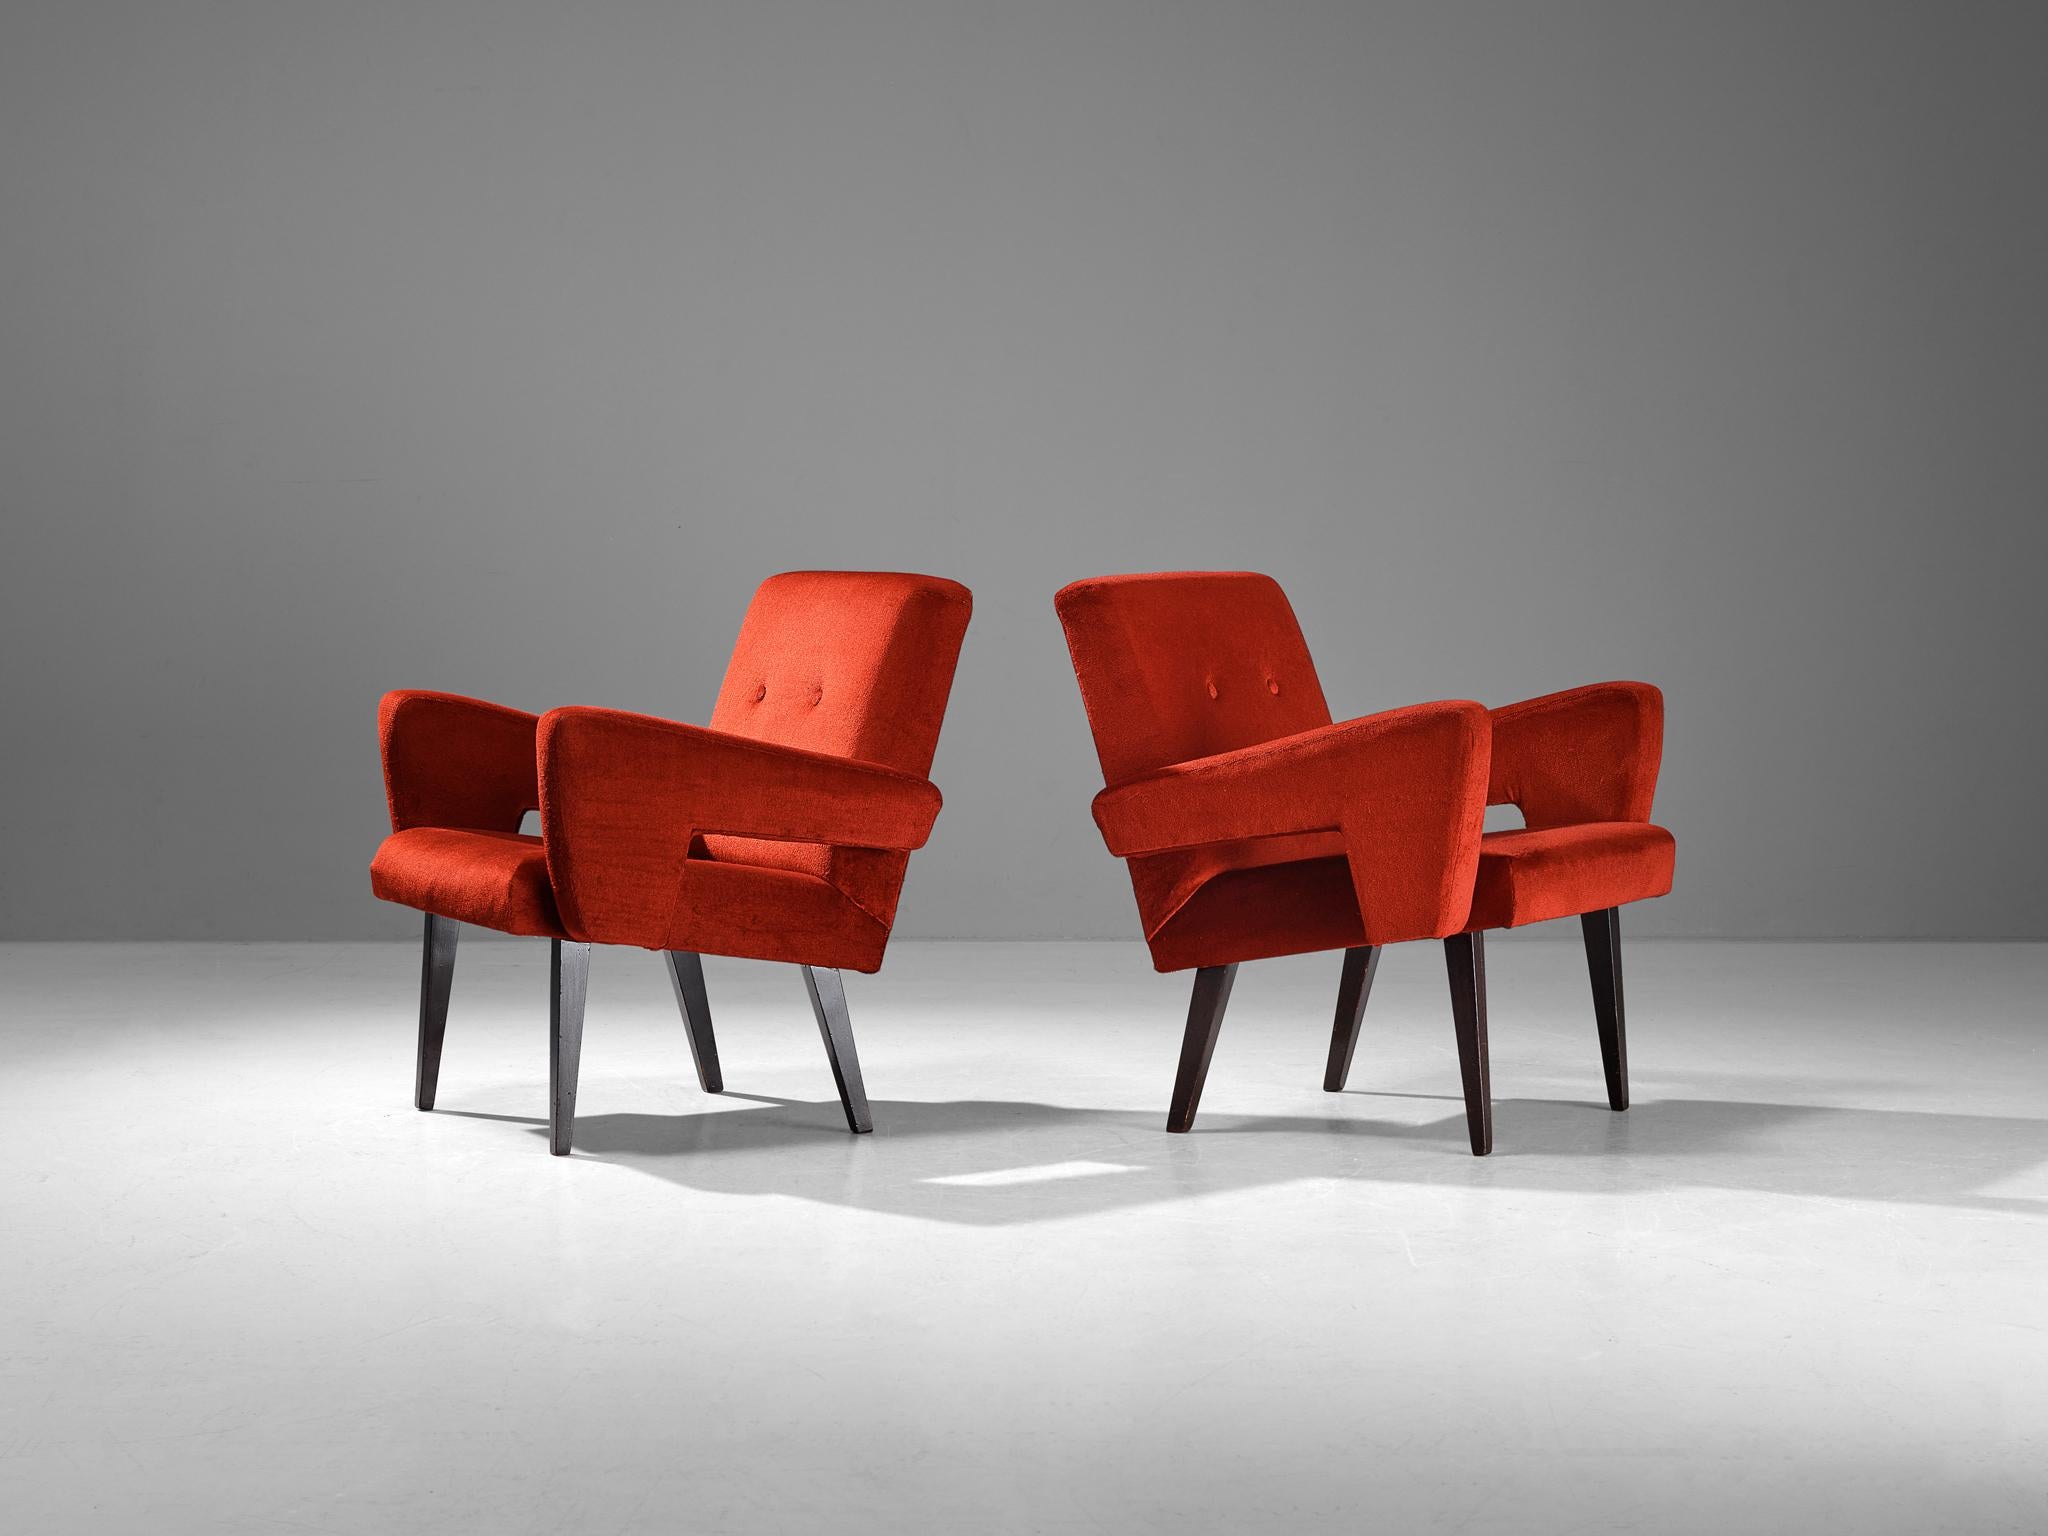 Pair of lounge chairs, velvet, stained beech, Czech Republic, 1960s

These well-proportioned armchairs are clear in their appearance with angular shapes and striking lines dominating the layout. A noticeable feature are the armrests that gradually